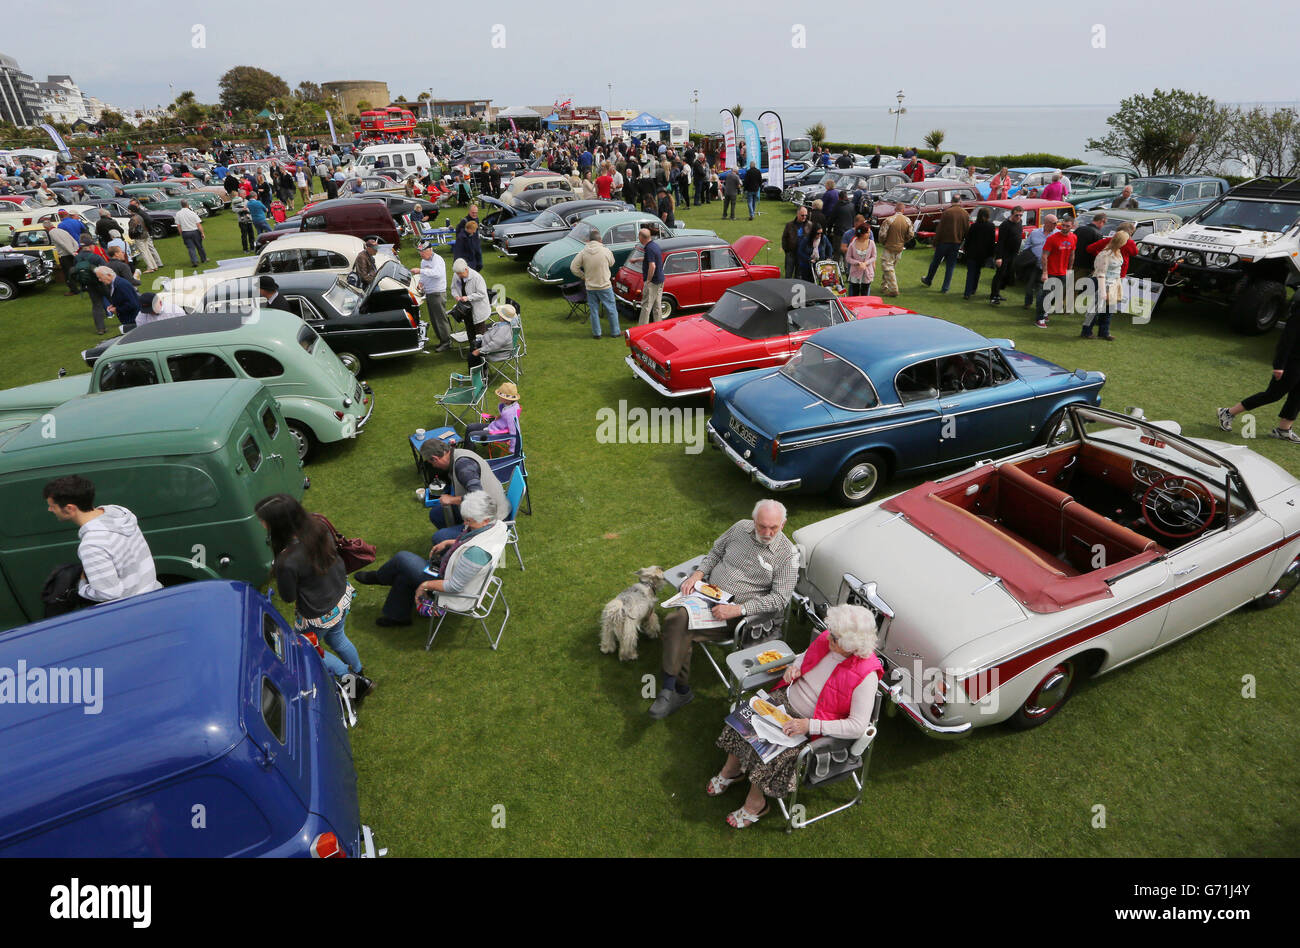 A couple enjoy the fine weather at the back of their classic car in Eastbourne, Sussex, during the second day of Magnificent Motors, as around 600 vintage and classic vehicles take part in the largest free motoring spectacular on the south coast. Stock Photo